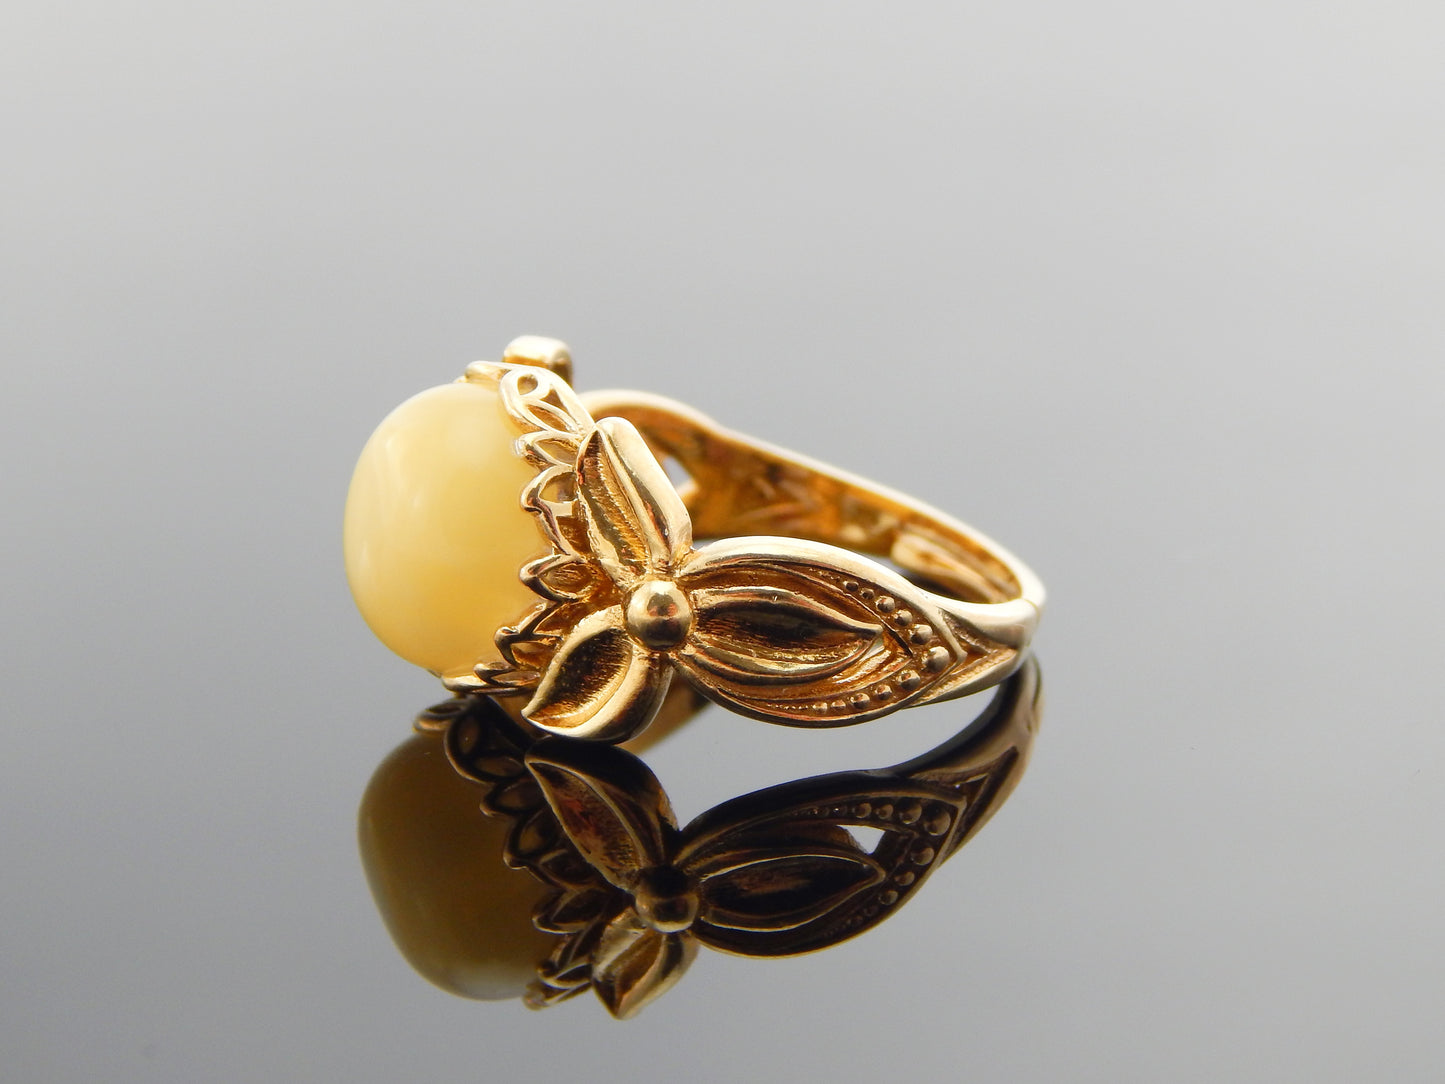 Natural Baltic Butterscotch Amber Royal Flower Adjustable Ring in 14k Gold Plated s925